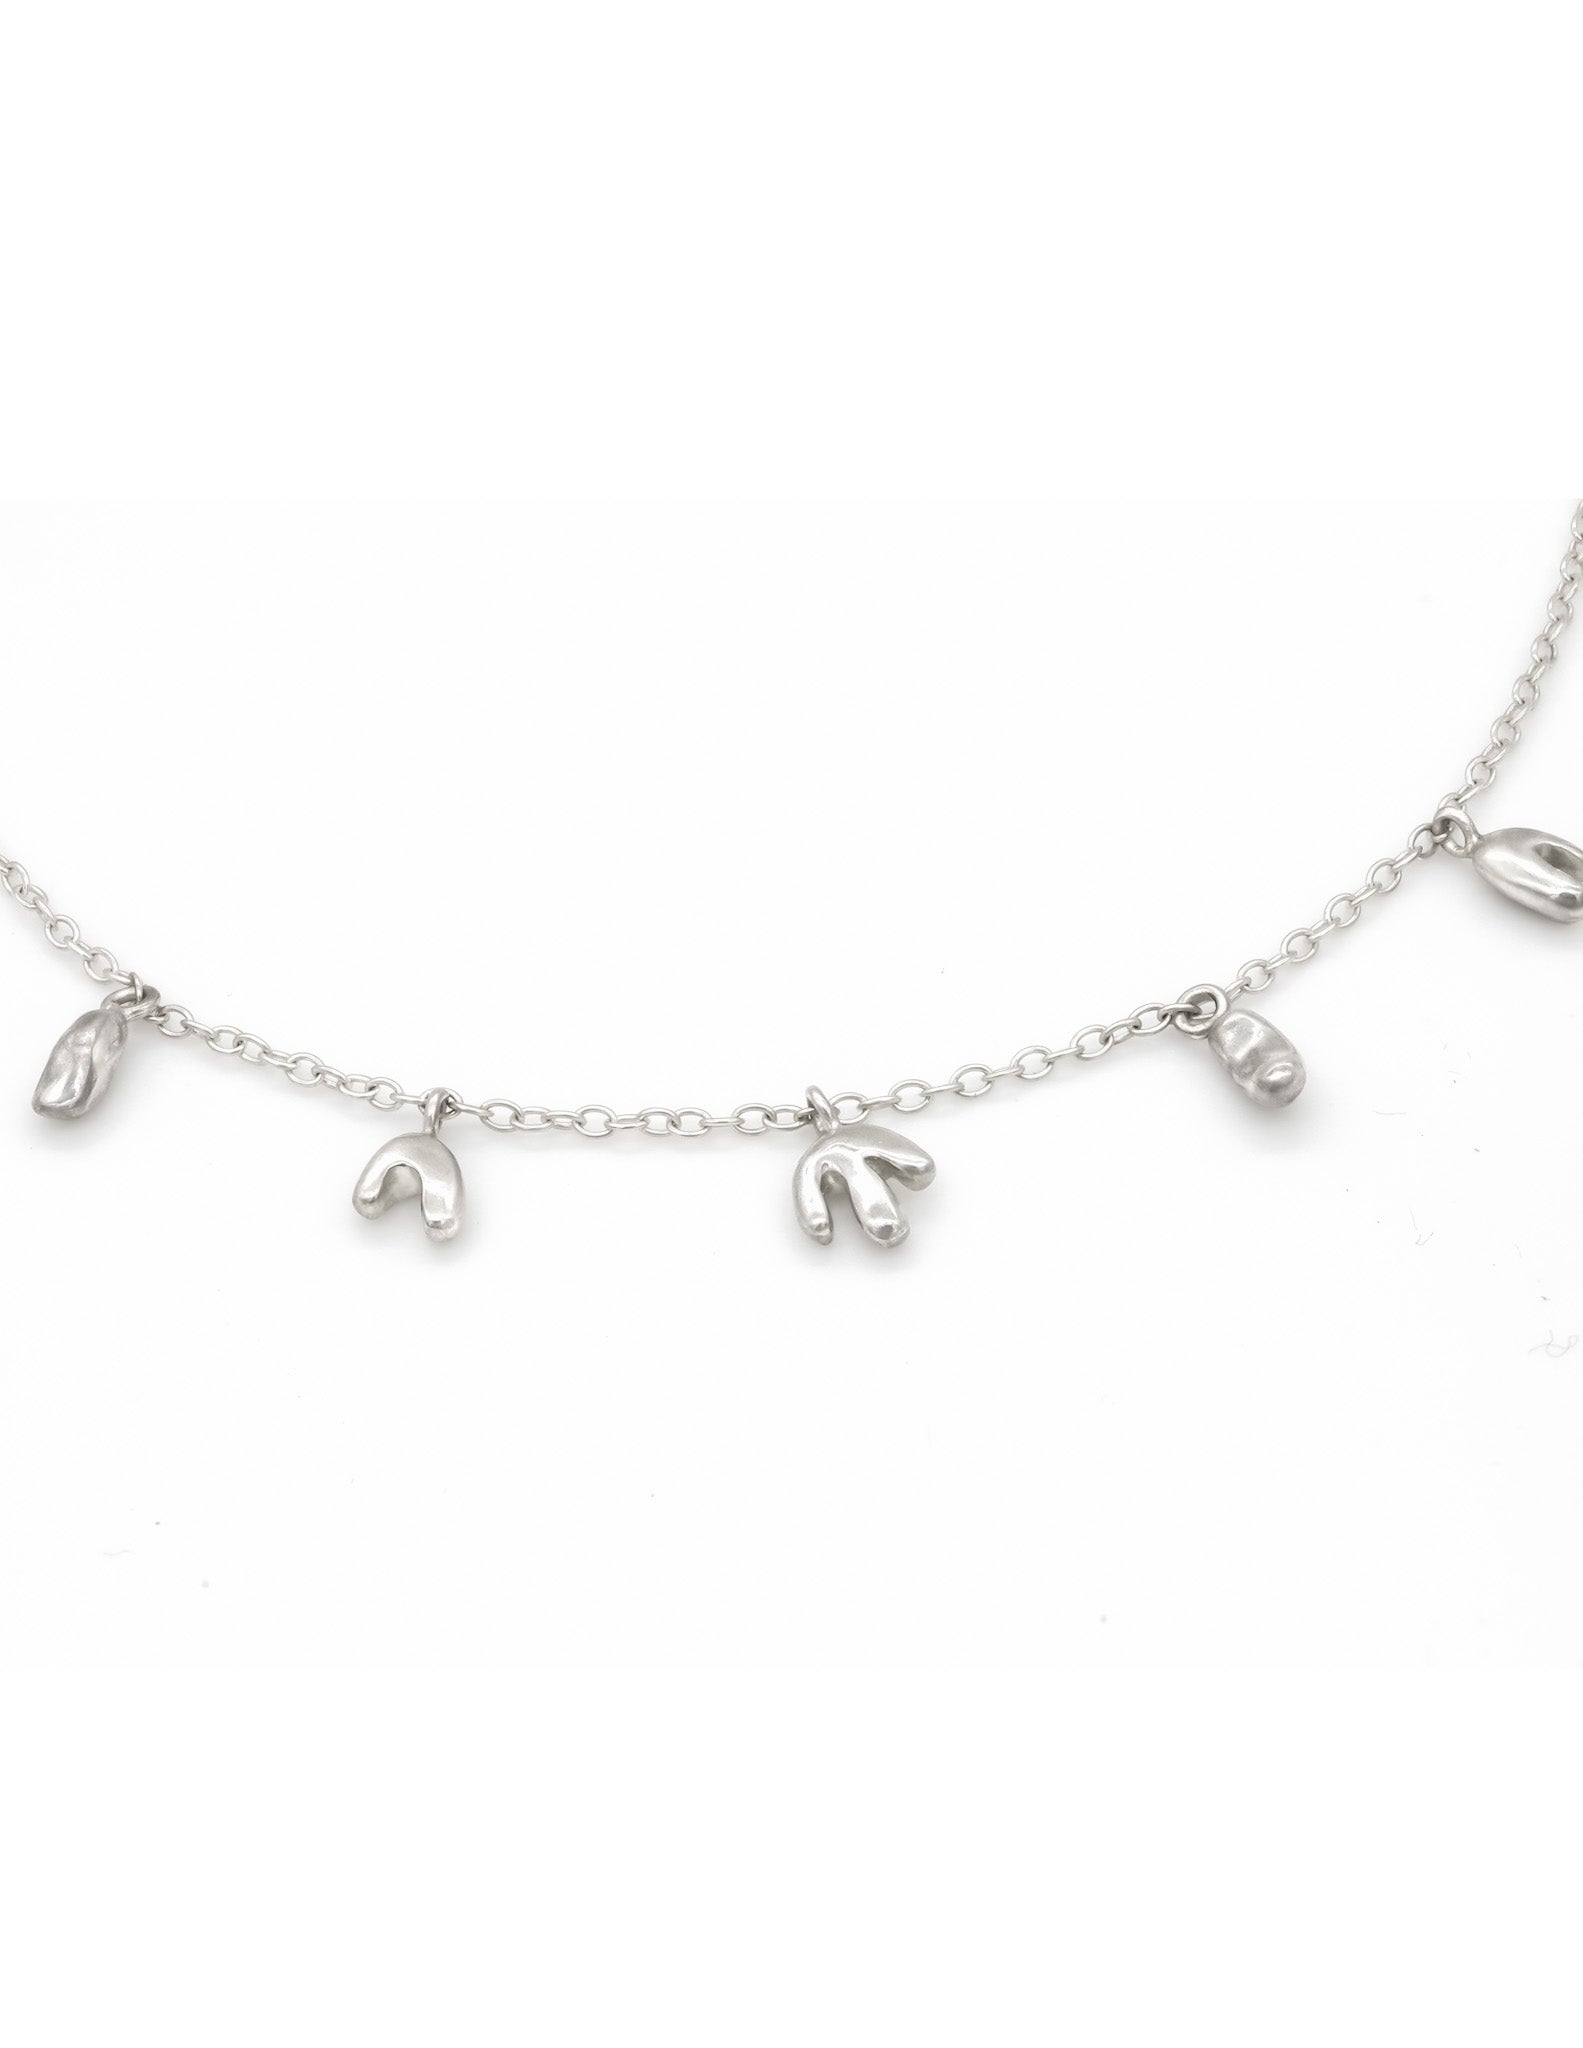 Kharys jewerly icicle charms organic shaped sterling silver necklace